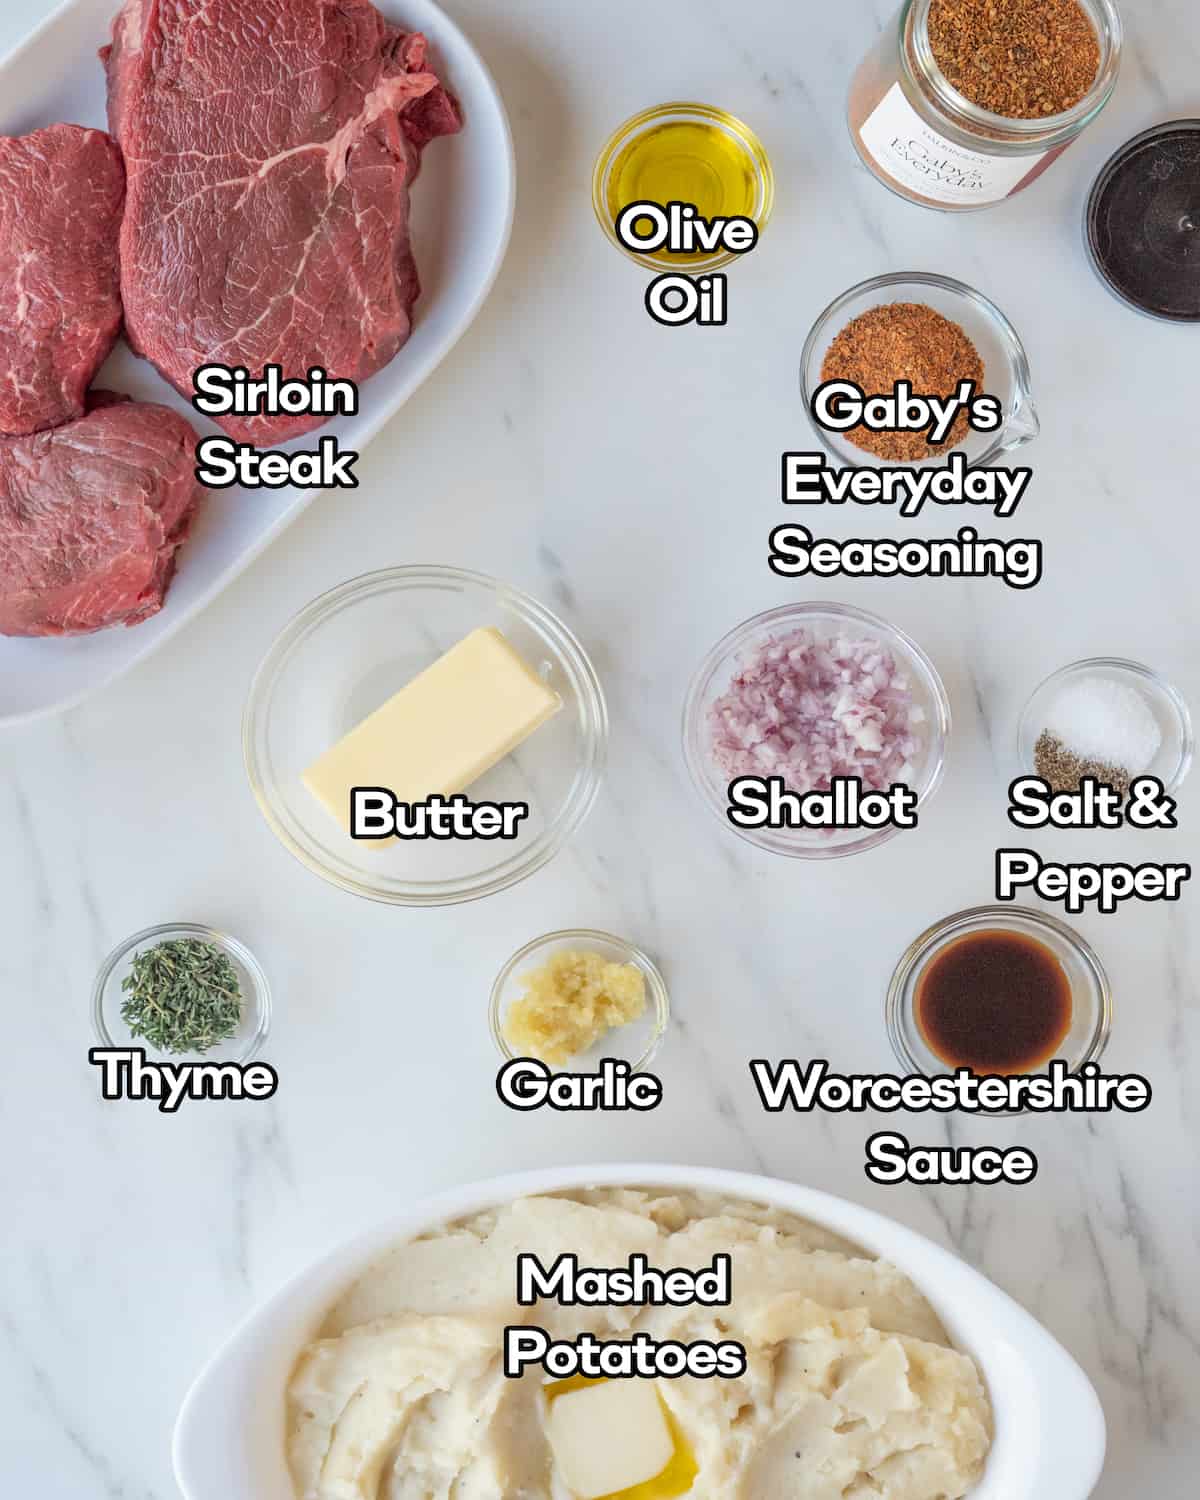 Ingredients in individual clear bowls including sirloin steak, Gaby's Everyday Seasoning from Dalkin&Co, olive oil, salt and pepper, shallot, Worcestershire sauce, garlic, butter, thyme, and mashed potatoes on a white marbled countertop.